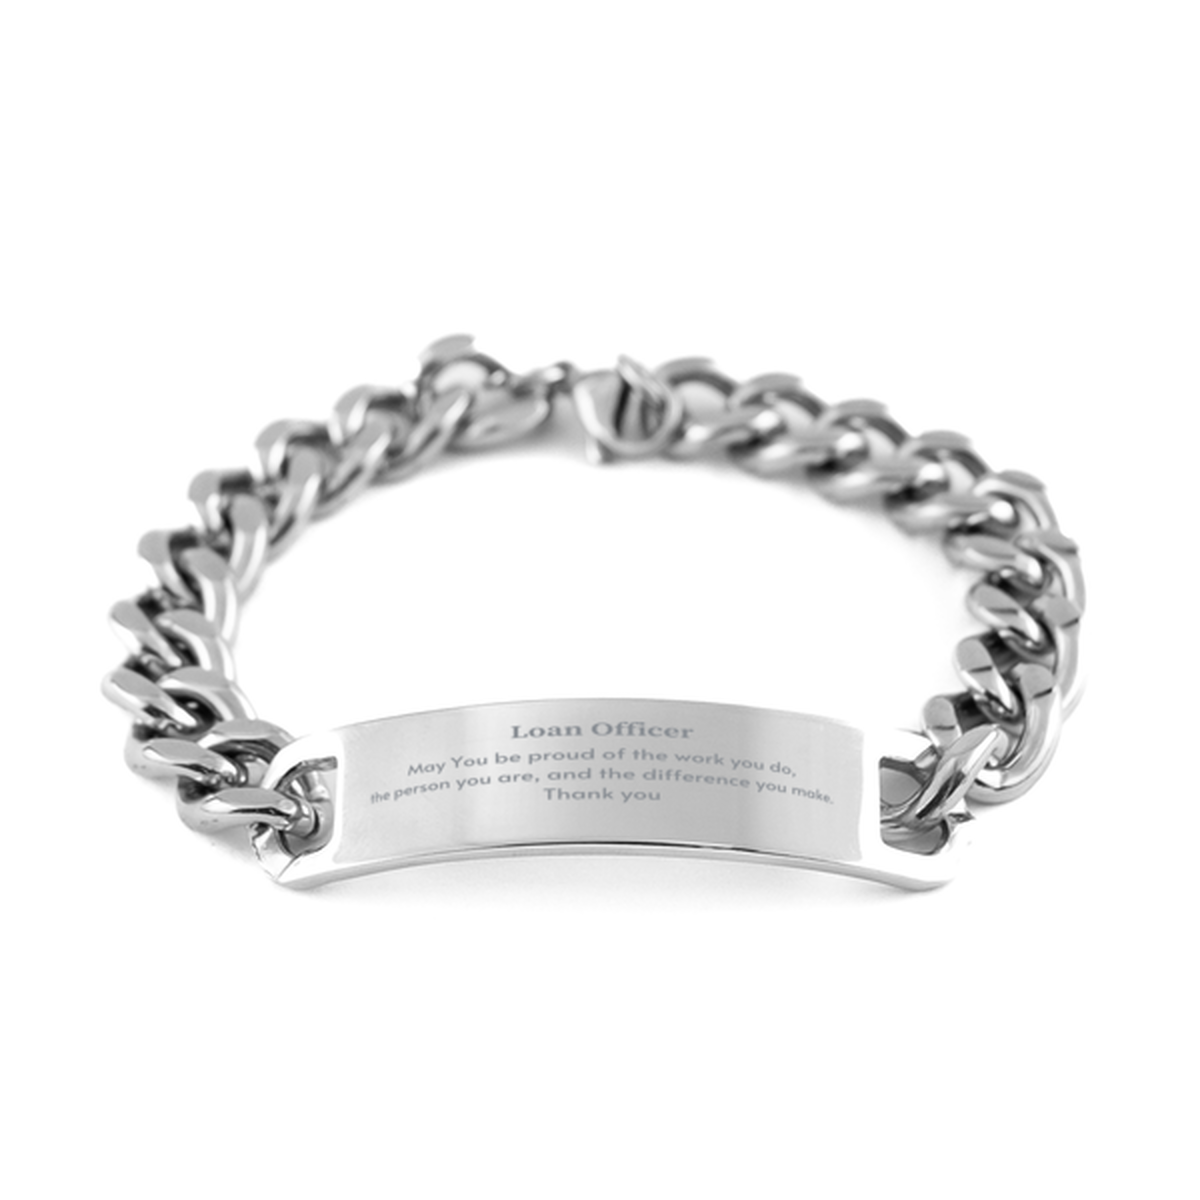 Heartwarming Cuban Chain Stainless Steel Bracelet Retirement Coworkers Gifts for Loan Officer, Loan Officer May You be proud of the work you do, the person you are Gifts for Boss Men Women Friends